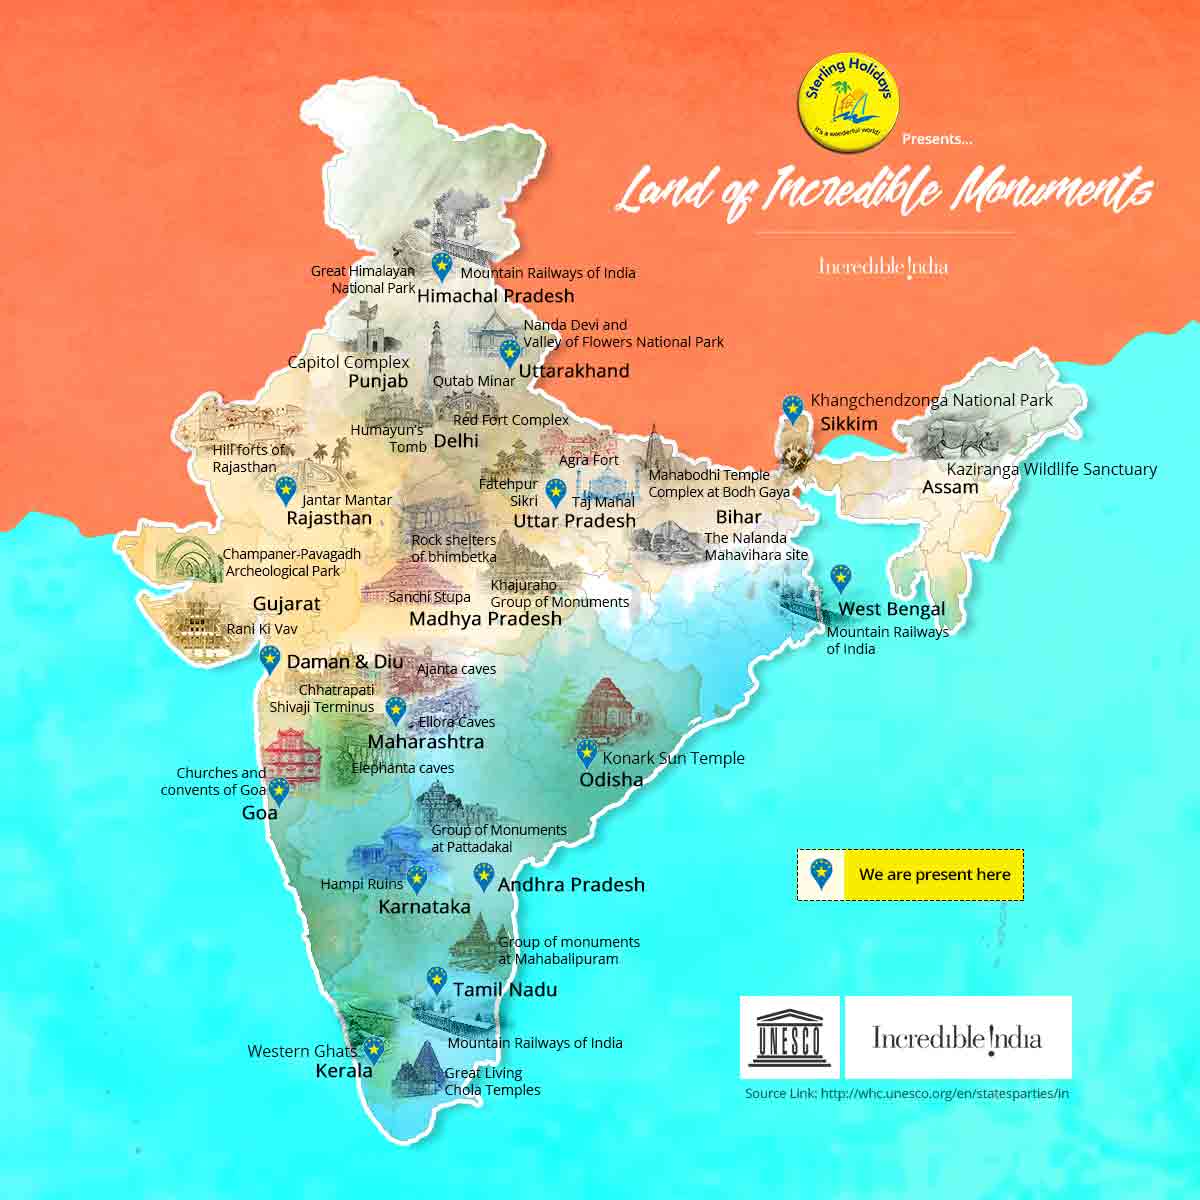 India - Land of Incredible Monuments